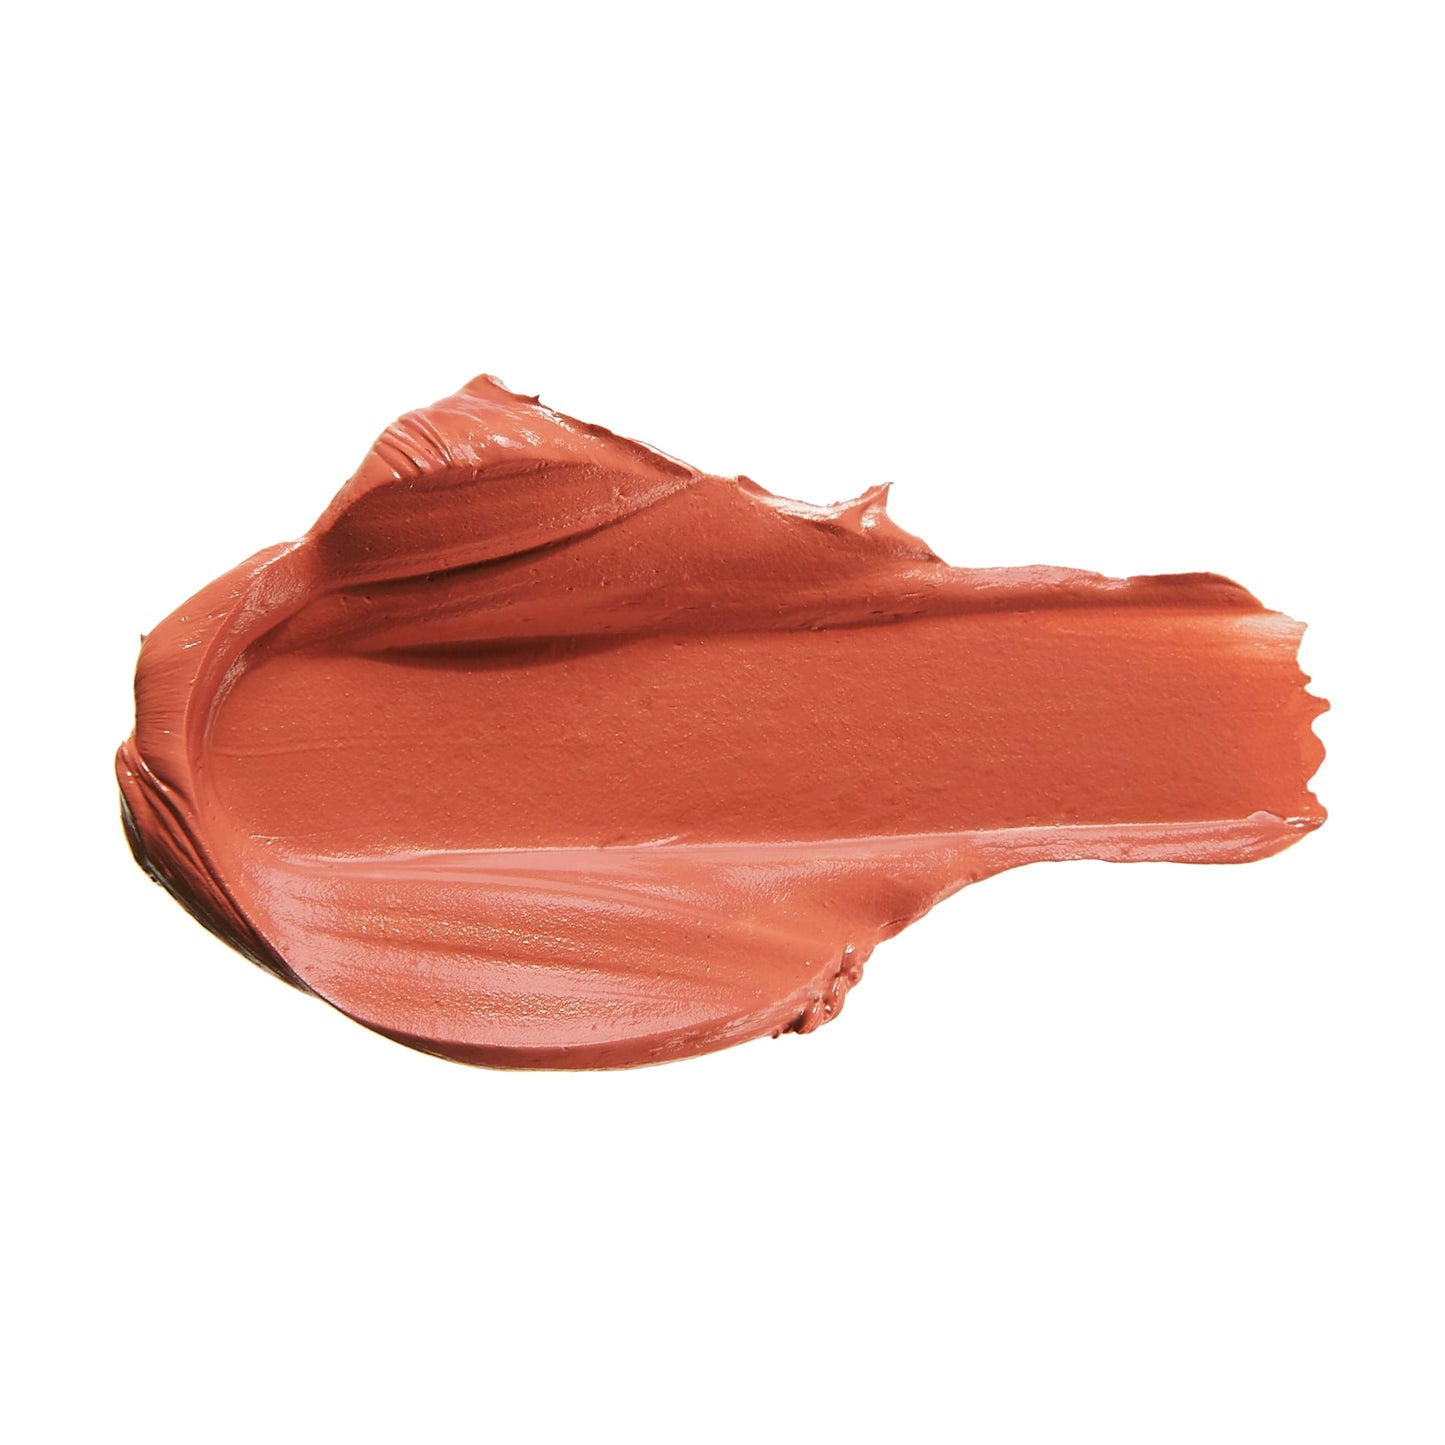 100% PURE Fruit Pigmented Cocoa Butter Matte Lipstick pink canyon